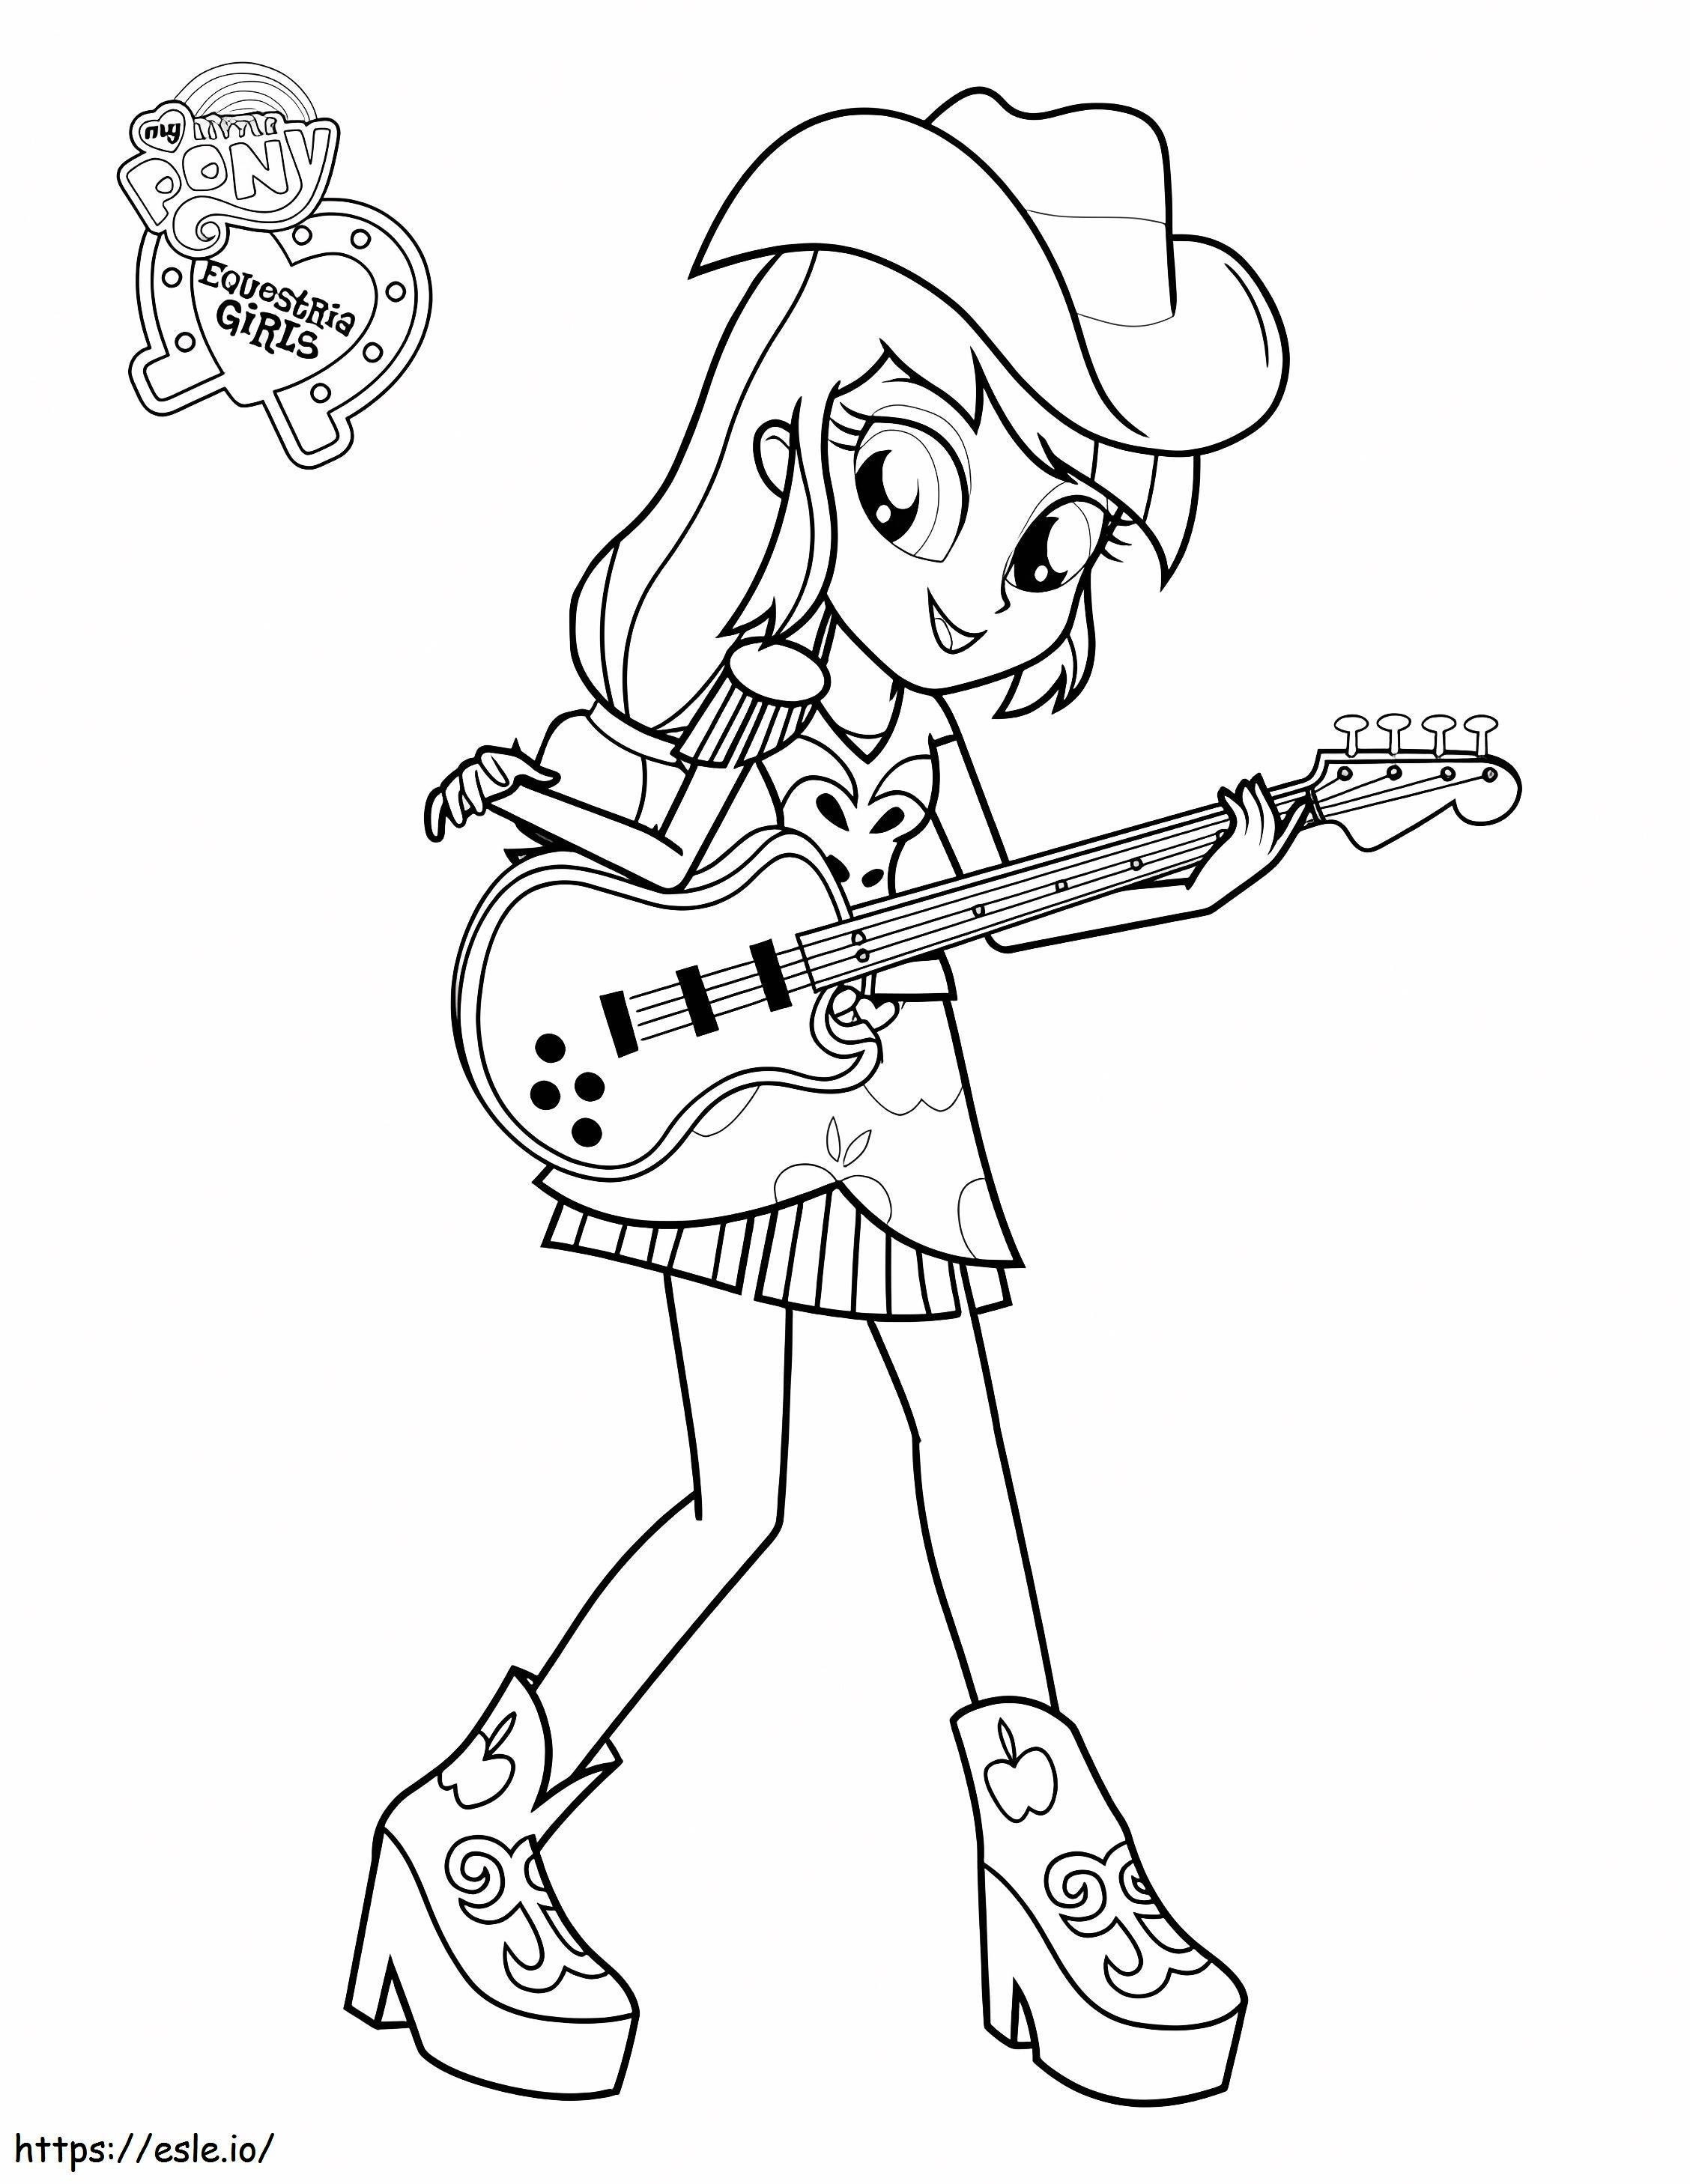 1535165459 Applejack Playing Guitar A4 coloring page